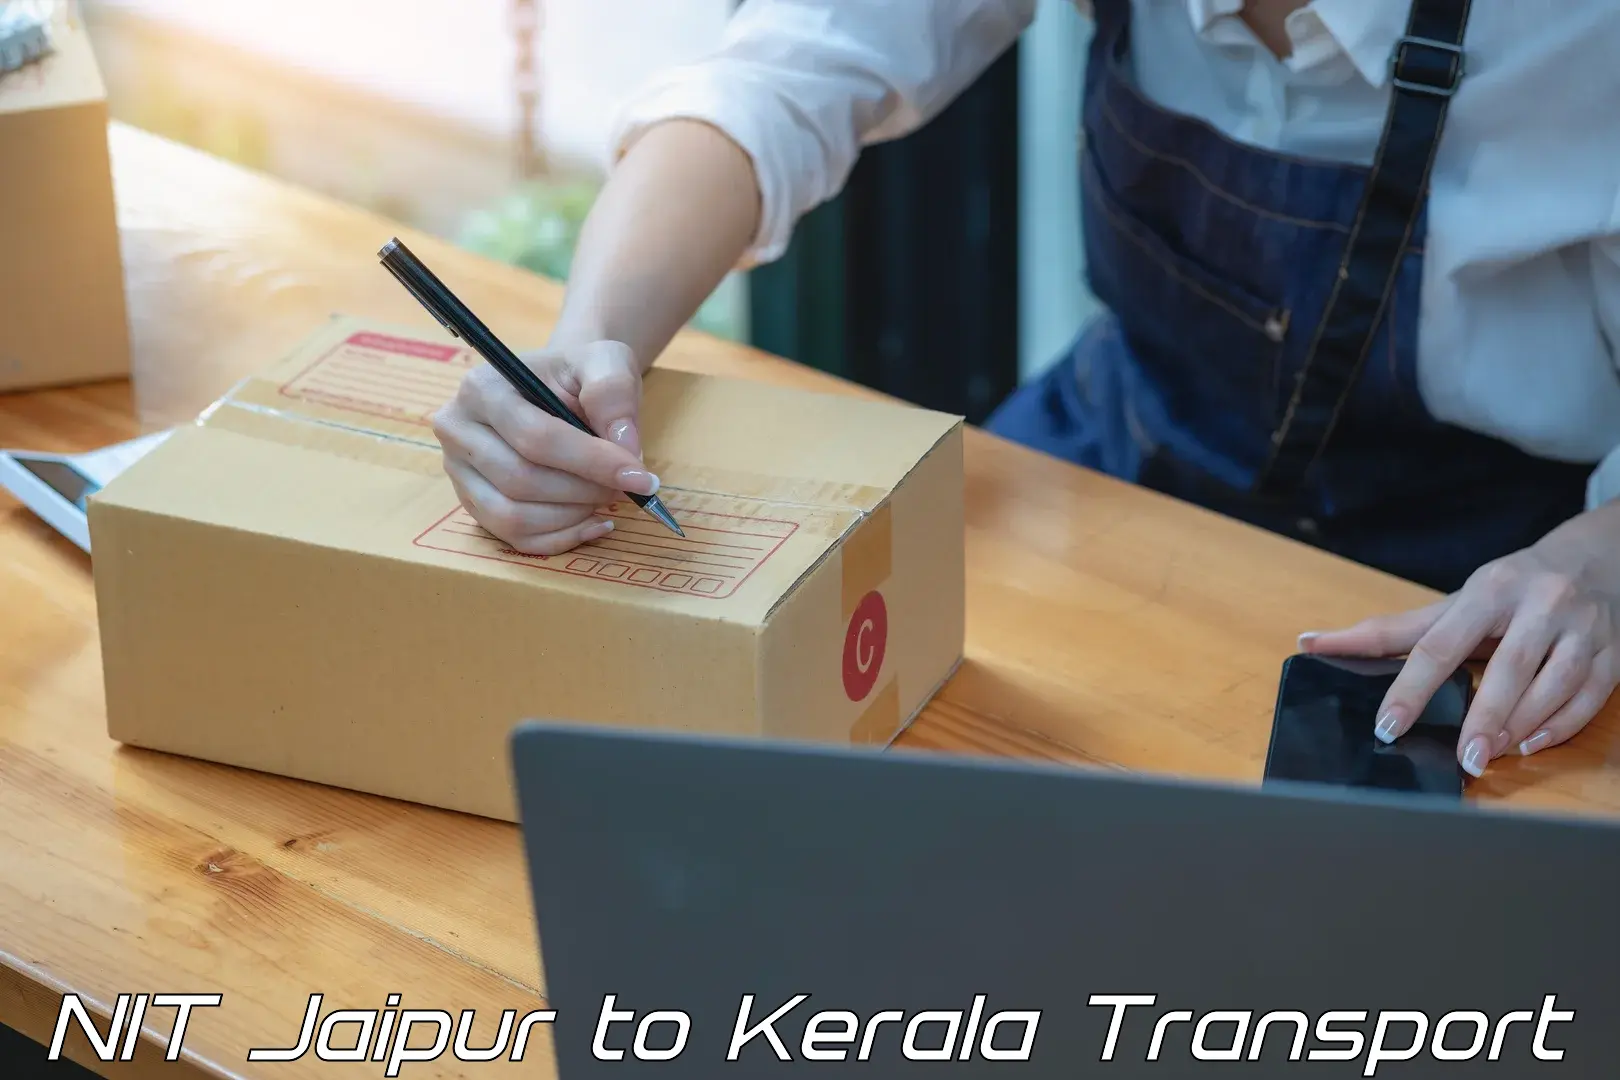 Container transportation services NIT Jaipur to Kerala